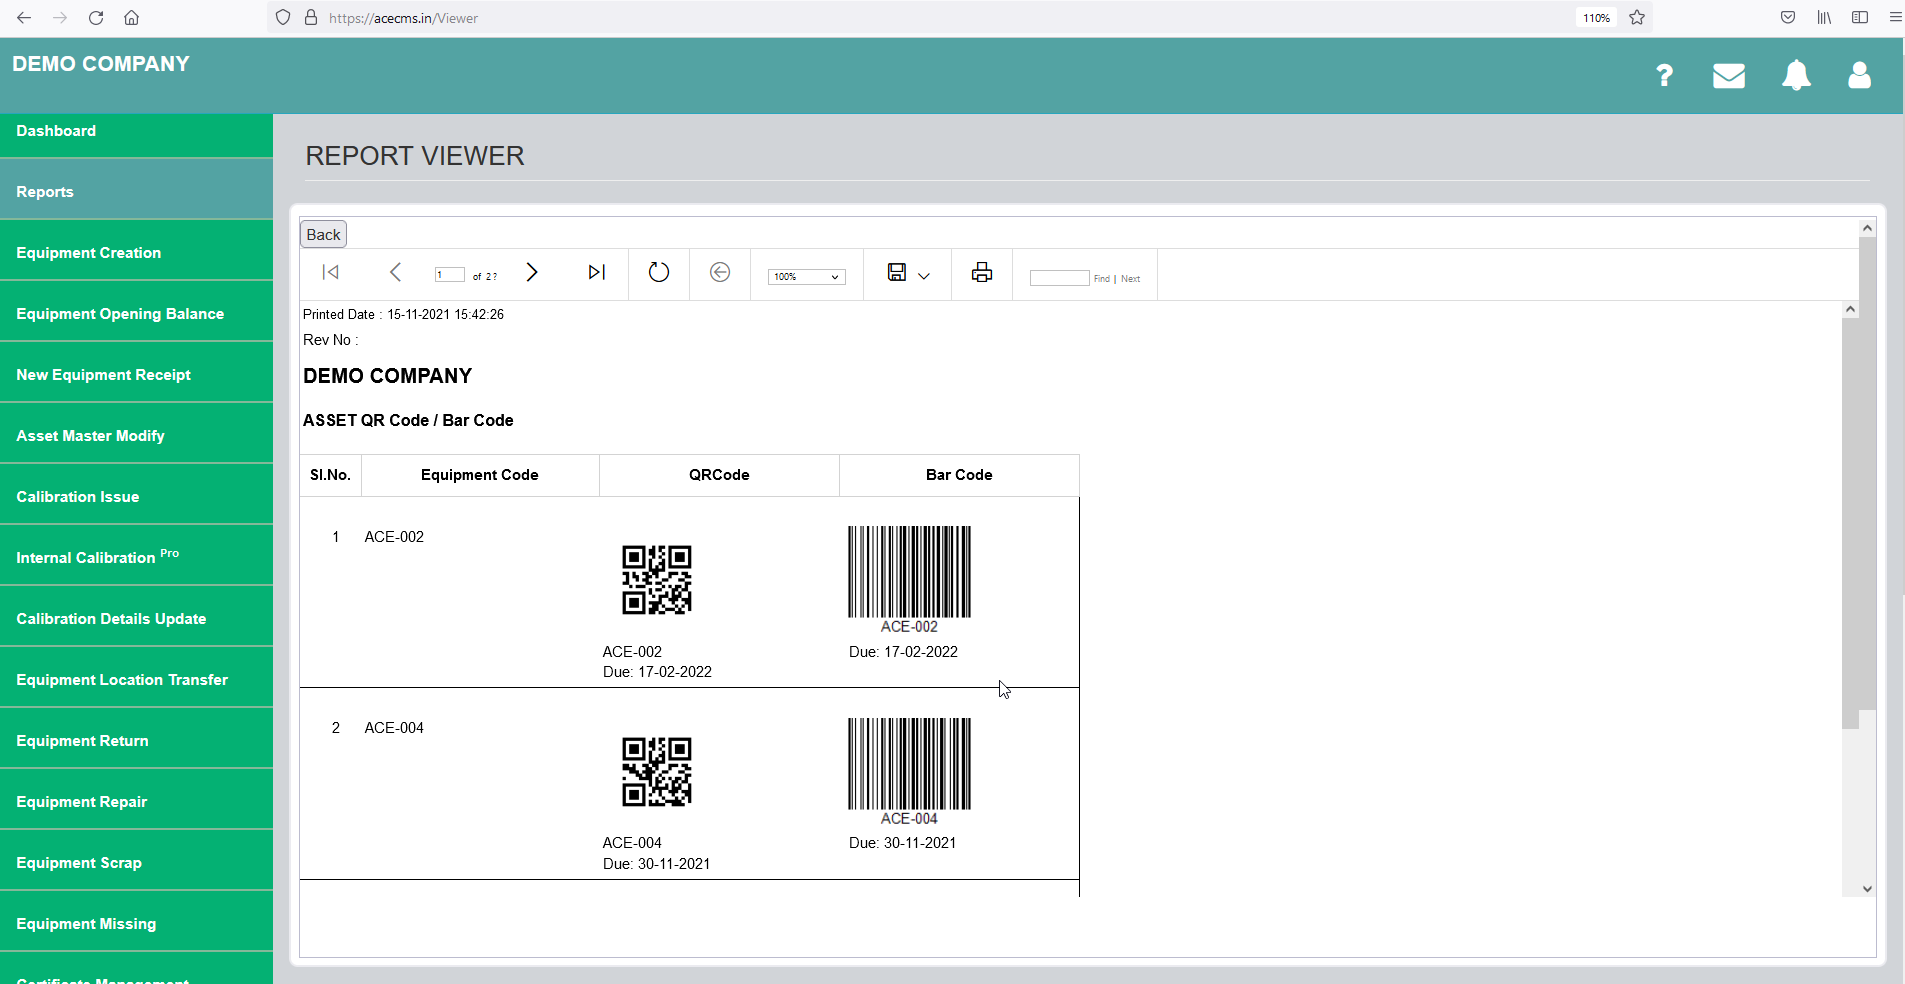 ACE Calibration Management System - QR and BAR Code Generation Page